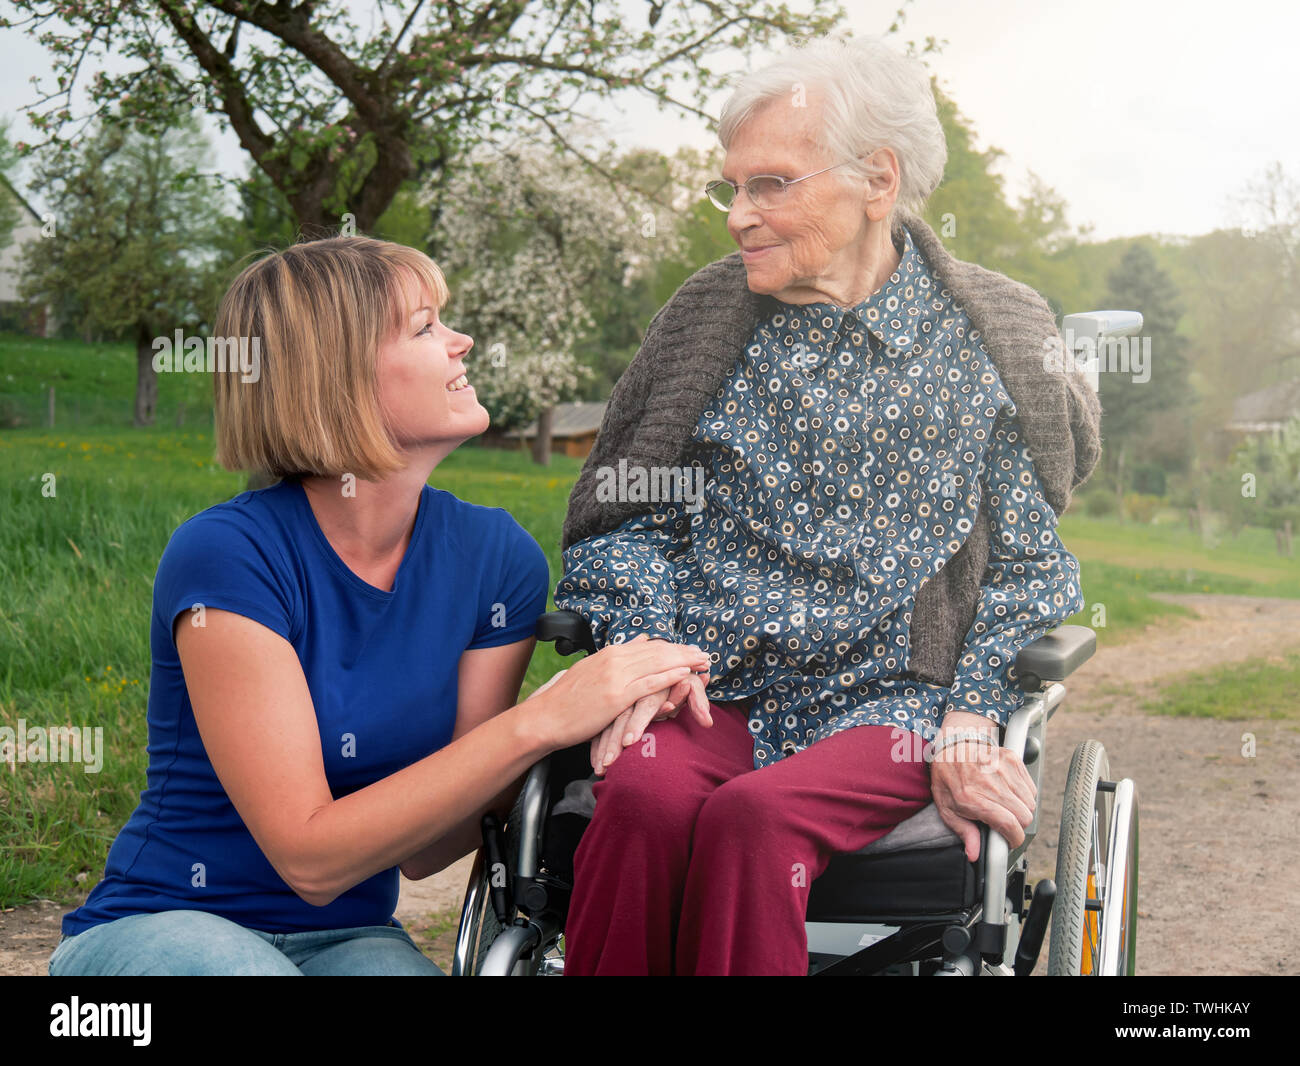 Young woman smiling at senior sitting in wheelchair Stock Photo